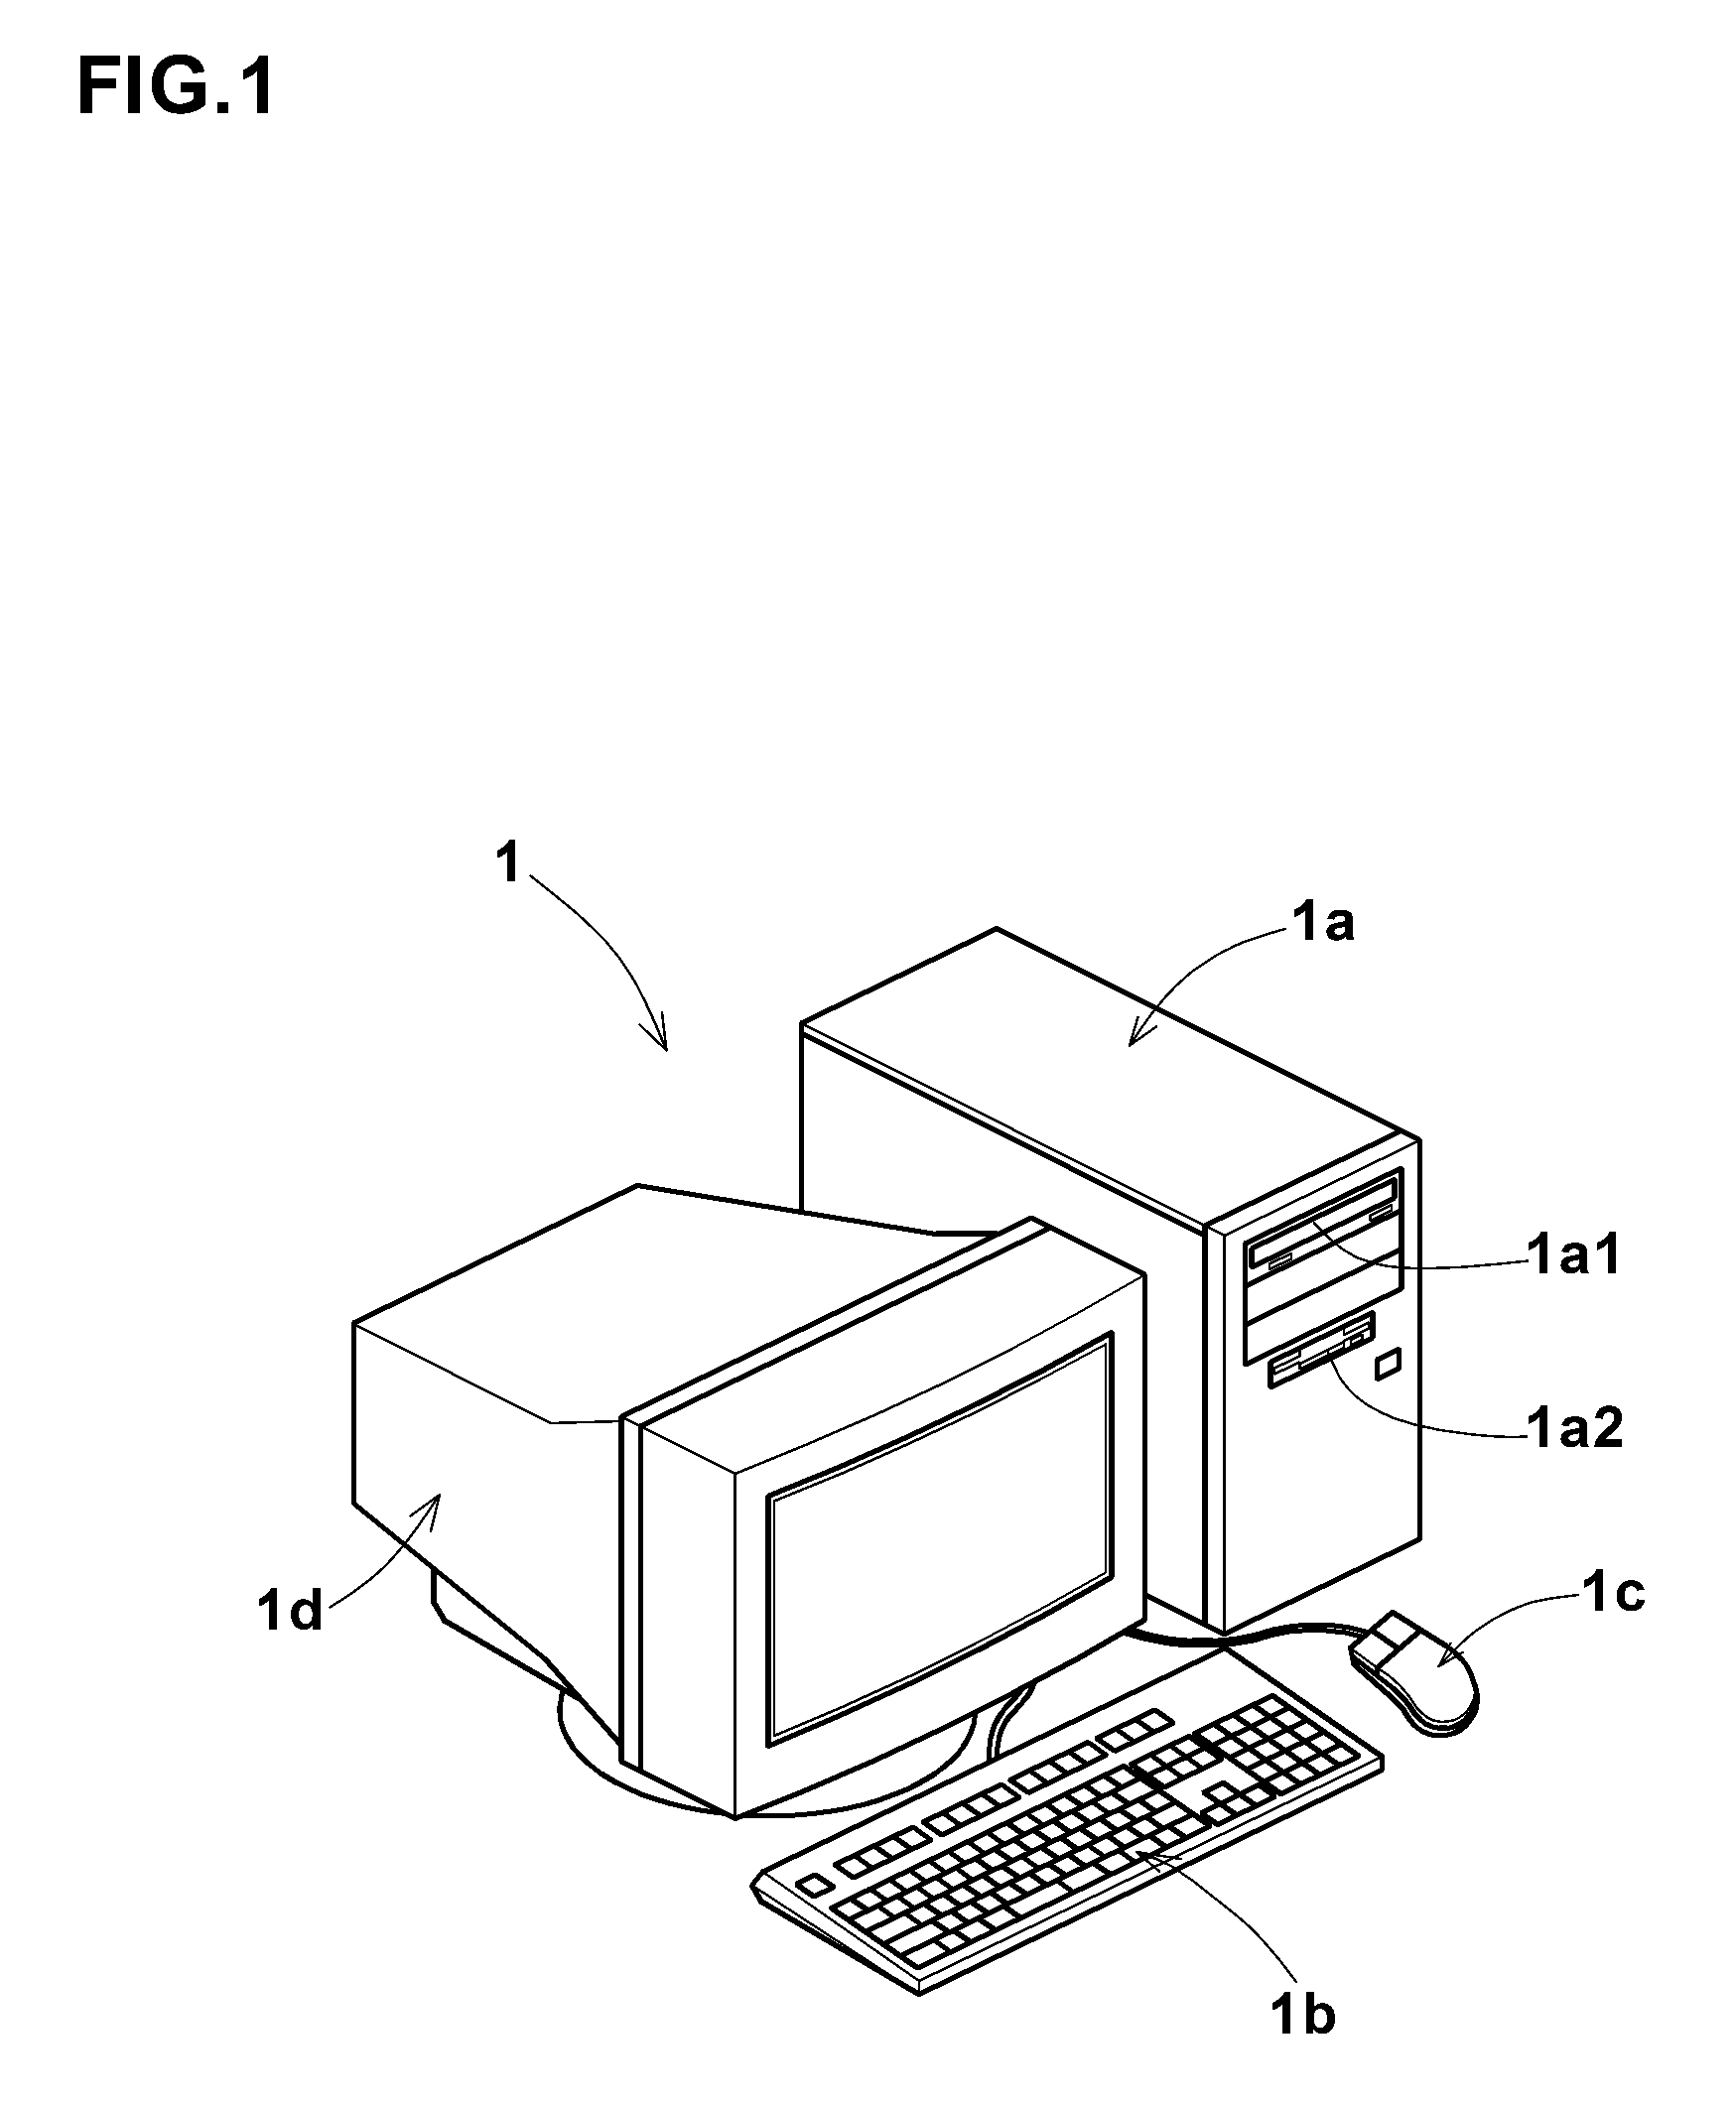 Method for simulating deformation of rubber compound with filler particles